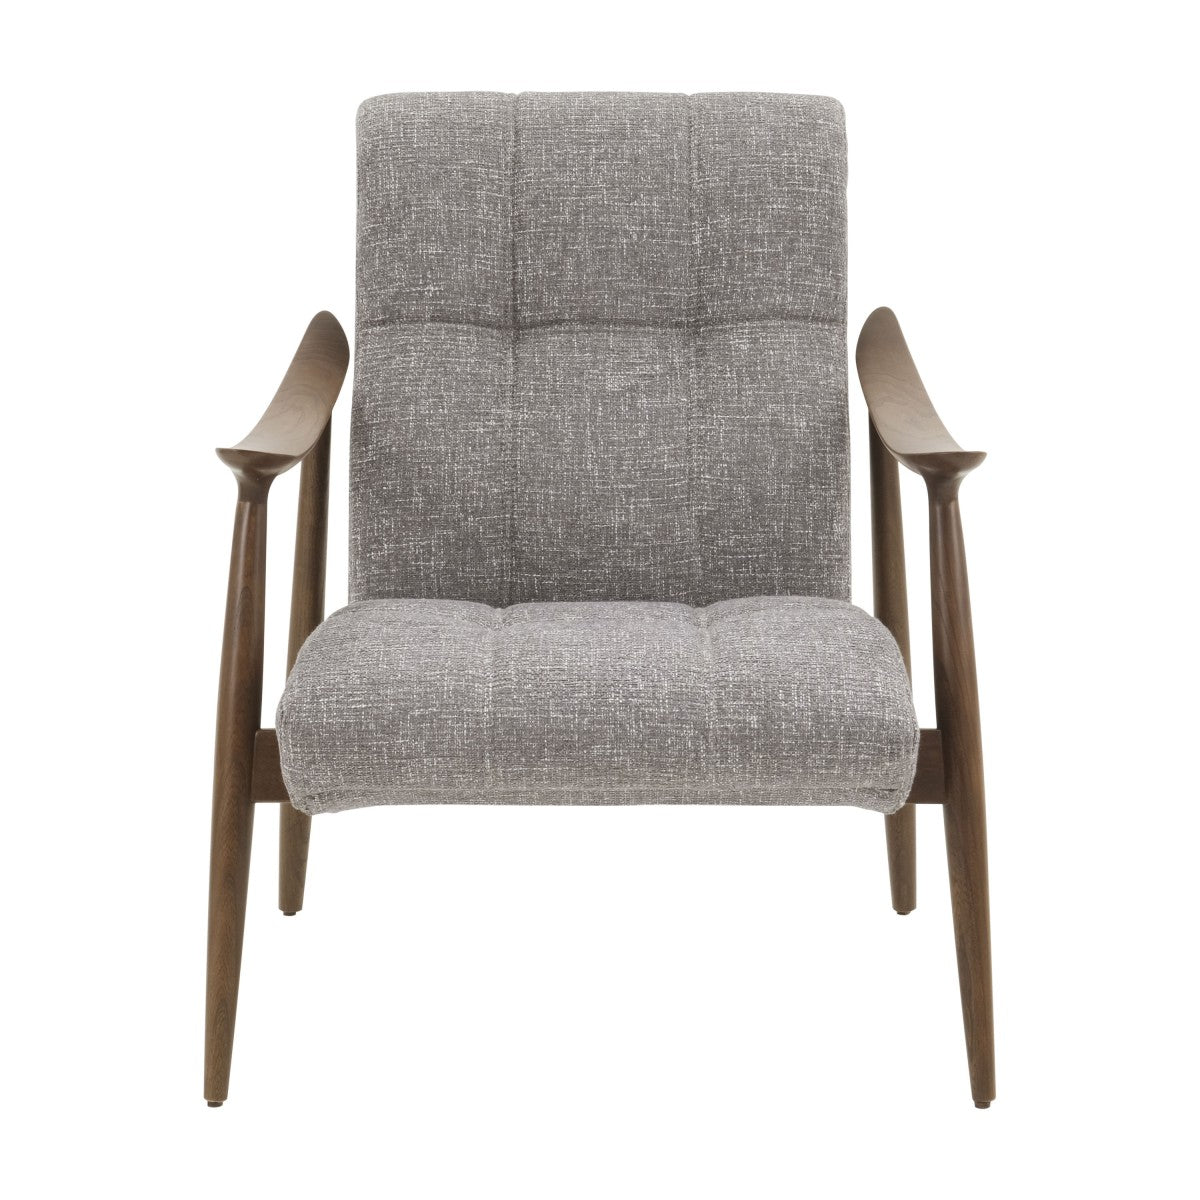 Kami Bespoke Upholstered Mid Century Modern Contemporary Armchair MS22P Custom Made To Order